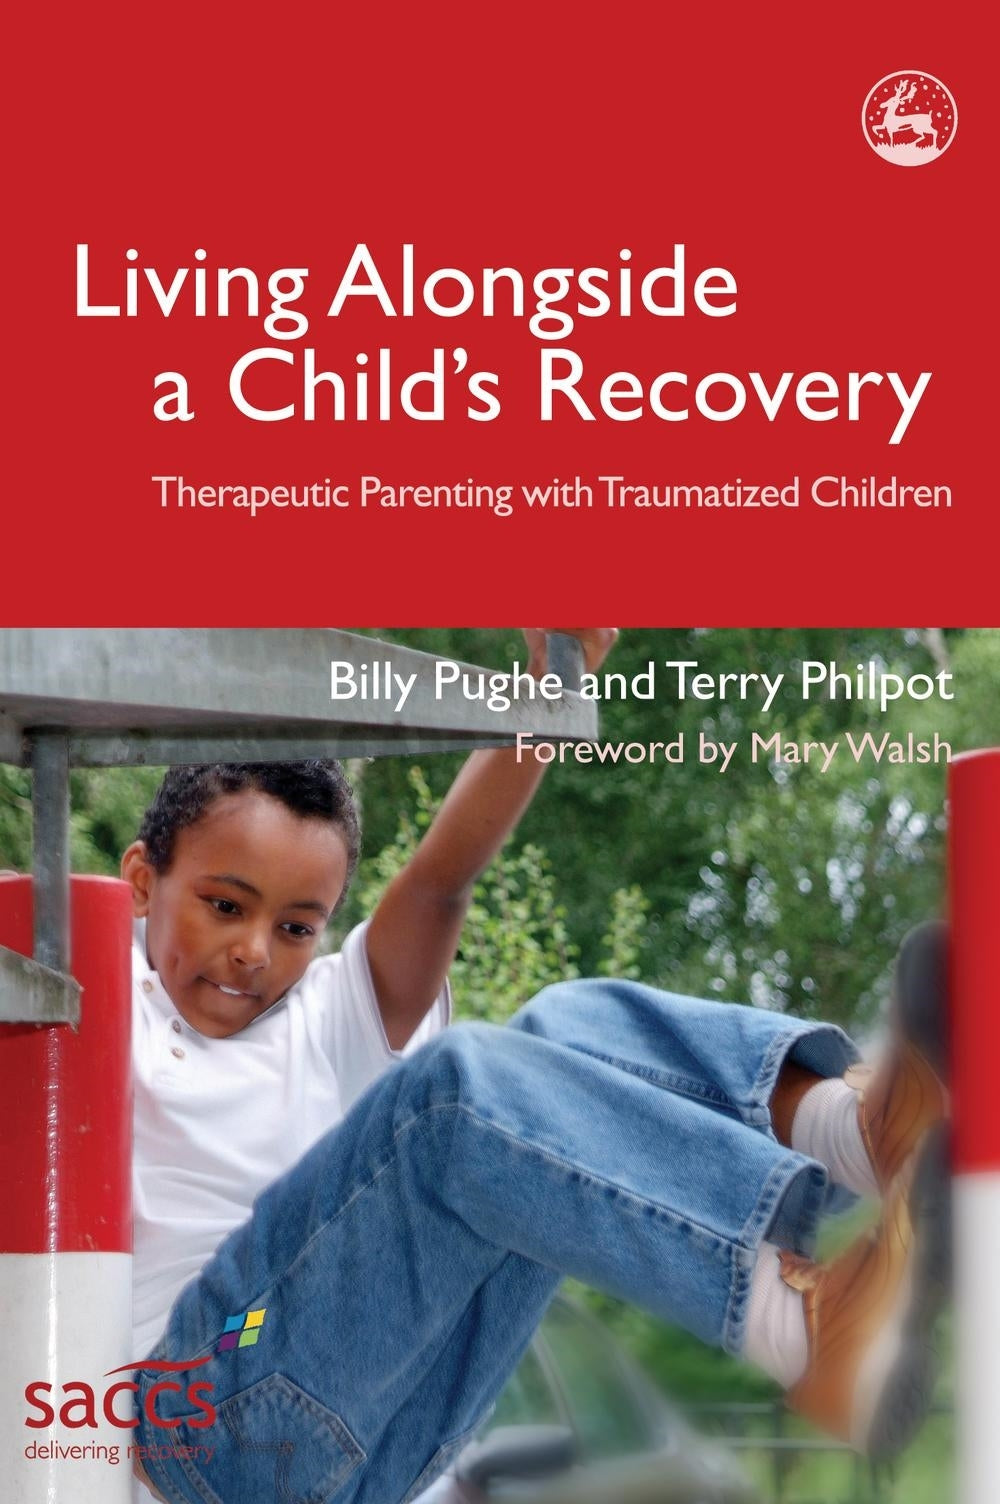 Living Alongside a Child's Recovery by Mary Walsh, Terry Philpot, Billy Pughe